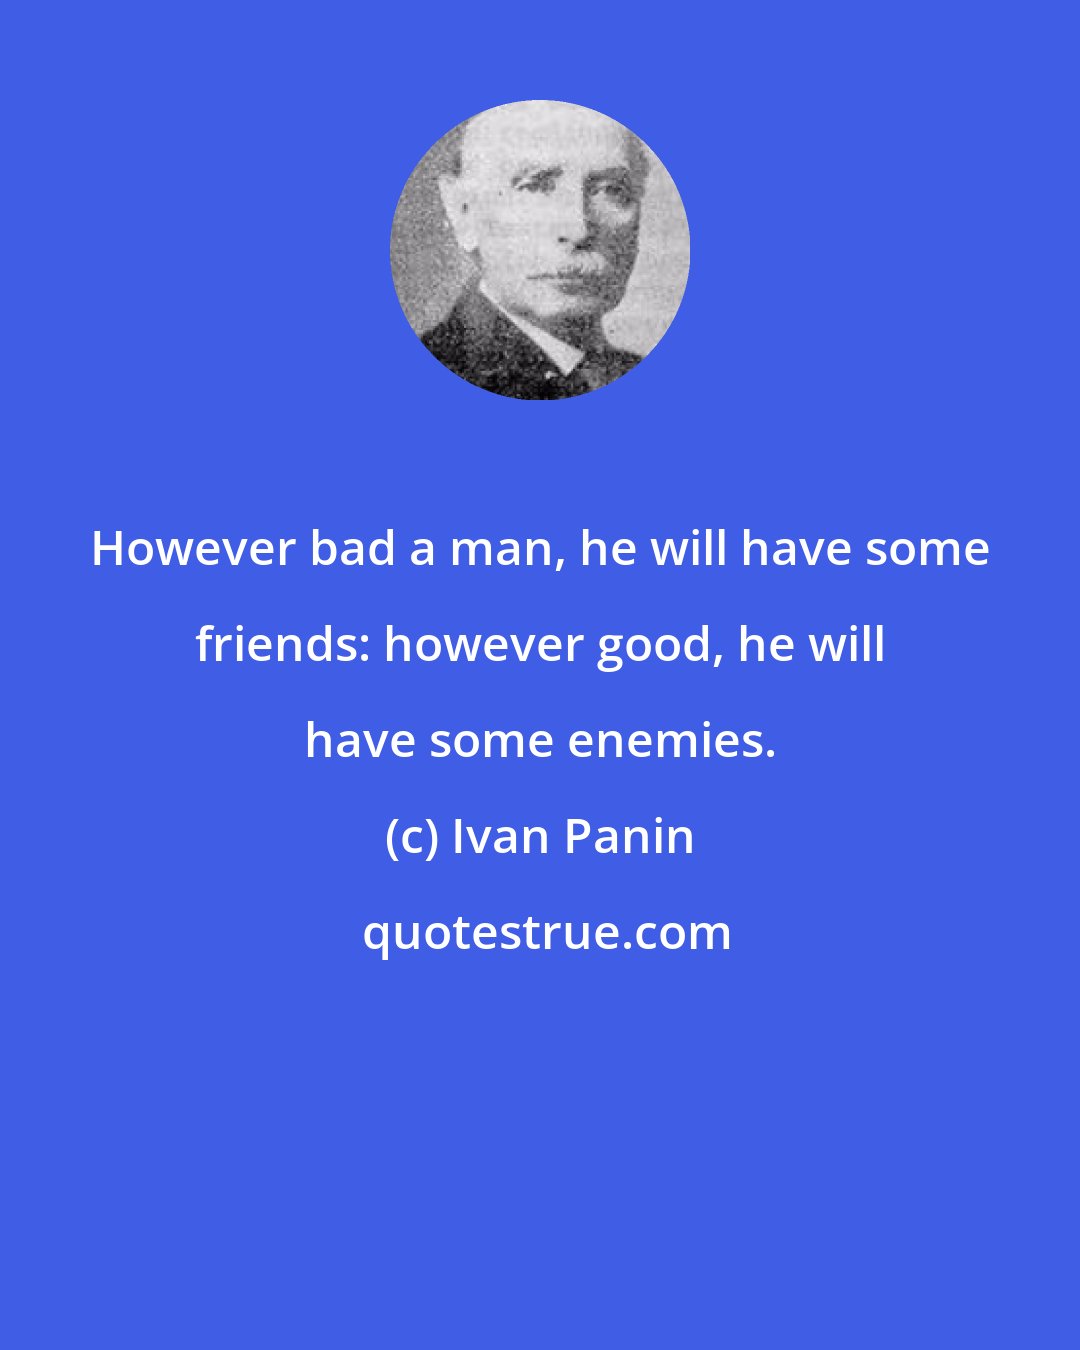 Ivan Panin: However bad a man, he will have some friends: however good, he will have some enemies.